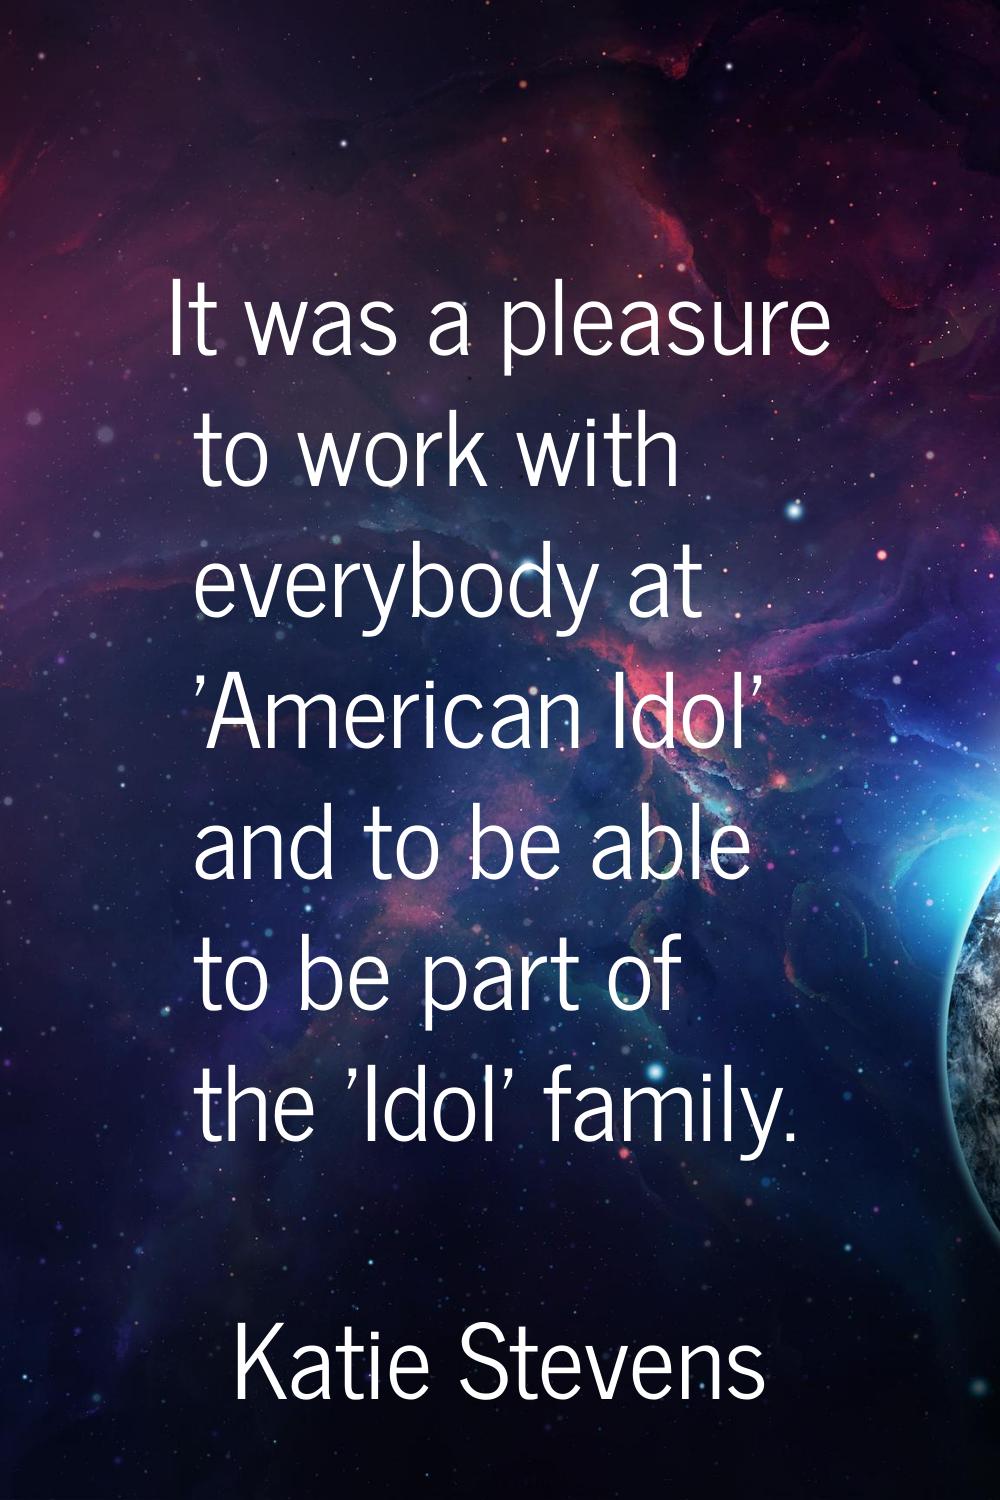 It was a pleasure to work with everybody at 'American Idol' and to be able to be part of the 'Idol'